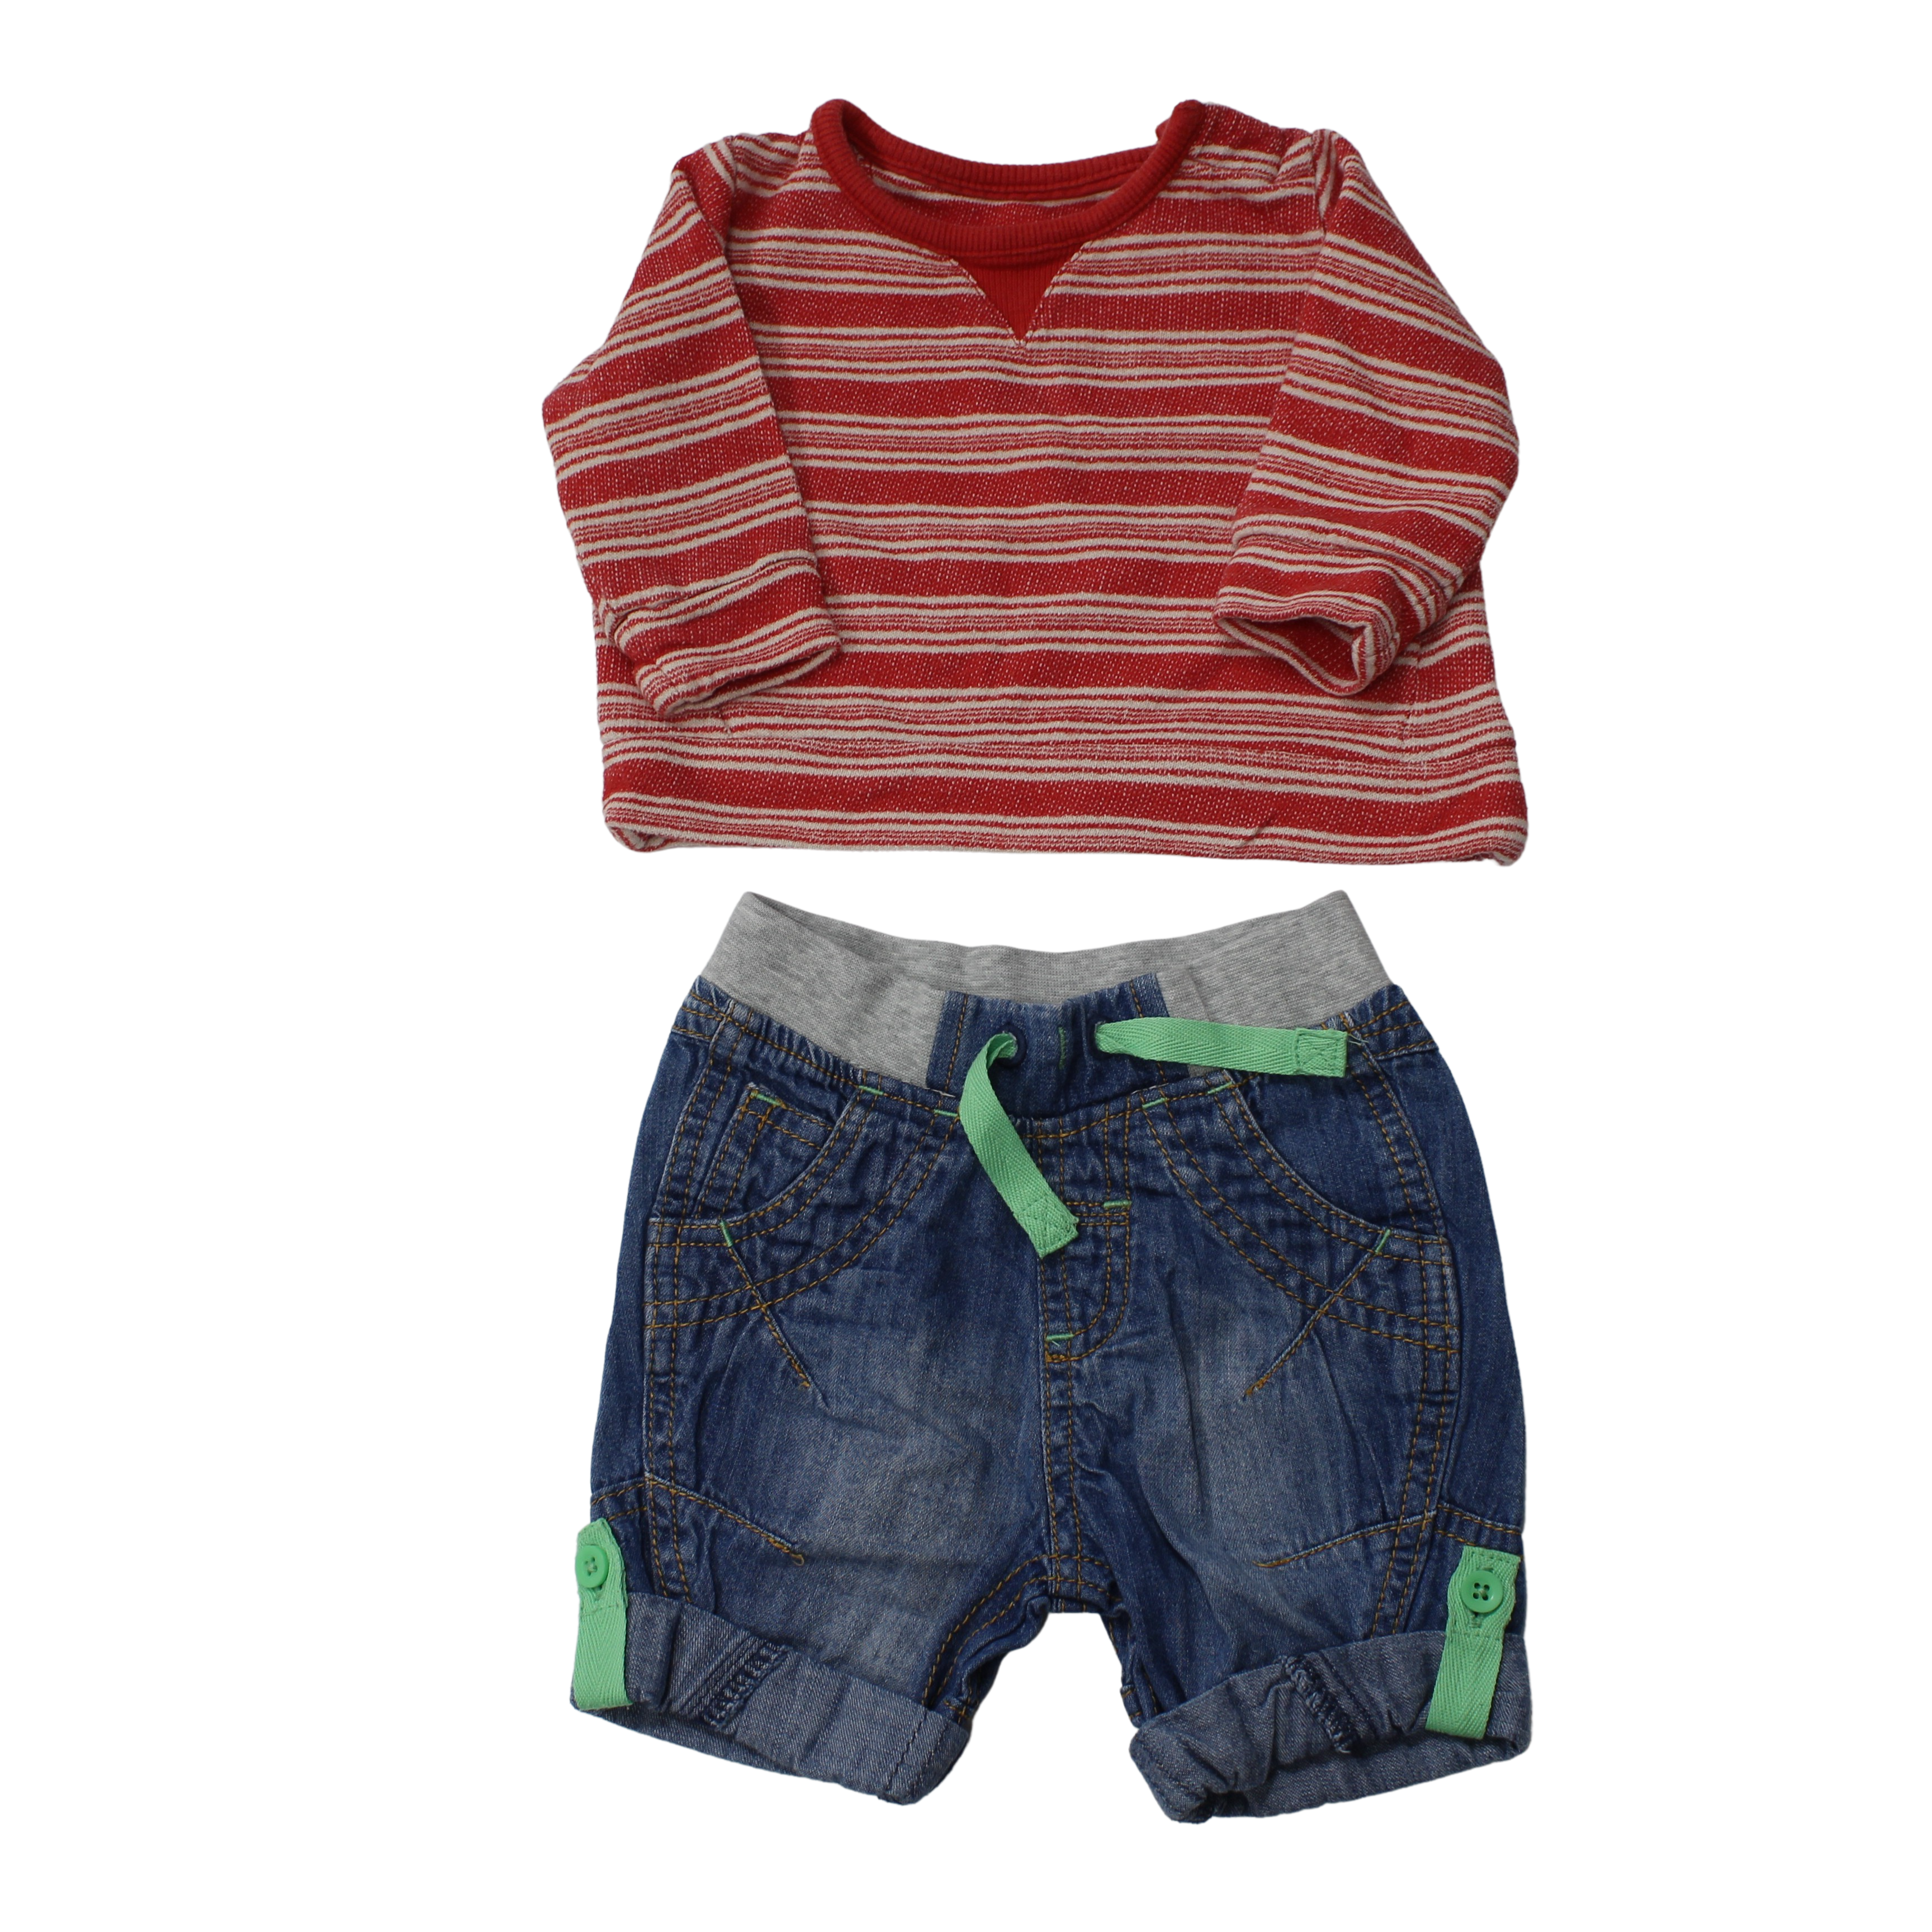 Summer Striped Outfit